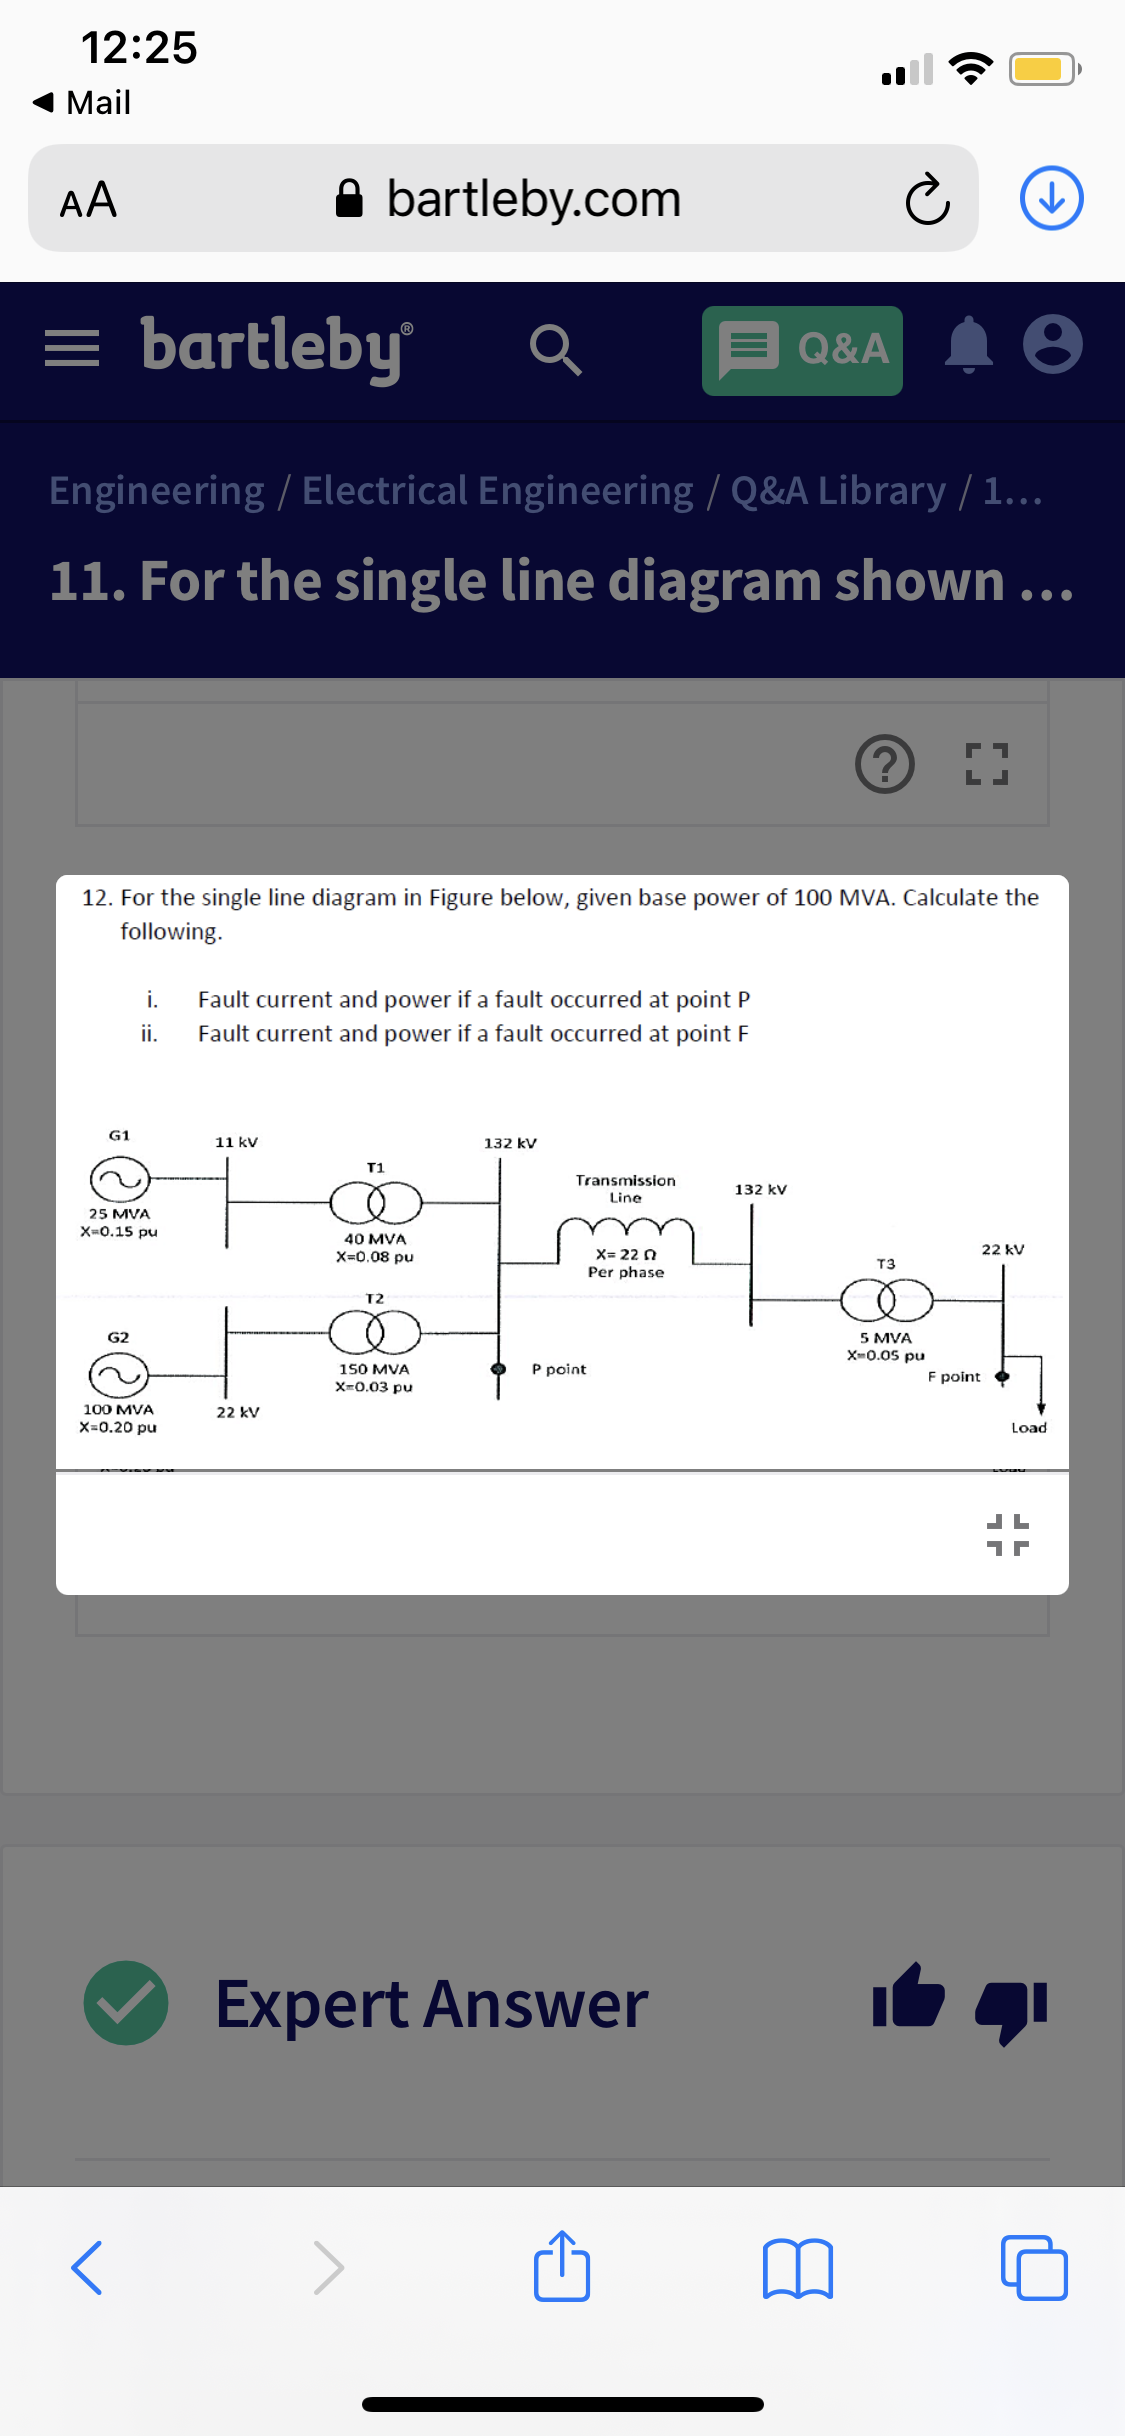 12:25
Mail
AA
A bartleby.com
= bartleby
Q&A
Engineering / Electrical Engineering / Q&A Library / 1...
11. For the single line diagram shown ..
12. For the single line diagram in Figure below, given base power of 100 MVA. Calculate the
following.
i.
Fault current and power if a fault occurred at point P
i.
Fault current and power if a fault occurred at point F
G1
11 kv
132 kV
T1
Transmission
132 kV
Line
25 MVA
X=0.15 pu
40 MVA
X=0.08 pu
X= 22 0
22 kV
T3
Per phase
T2
G2
5 MVA
X-0.05 pu
150 MVA
X-0.03 pu
P point
F point
100 MVA
22 kV
X=0.20 pu
Load
Expert Answer
